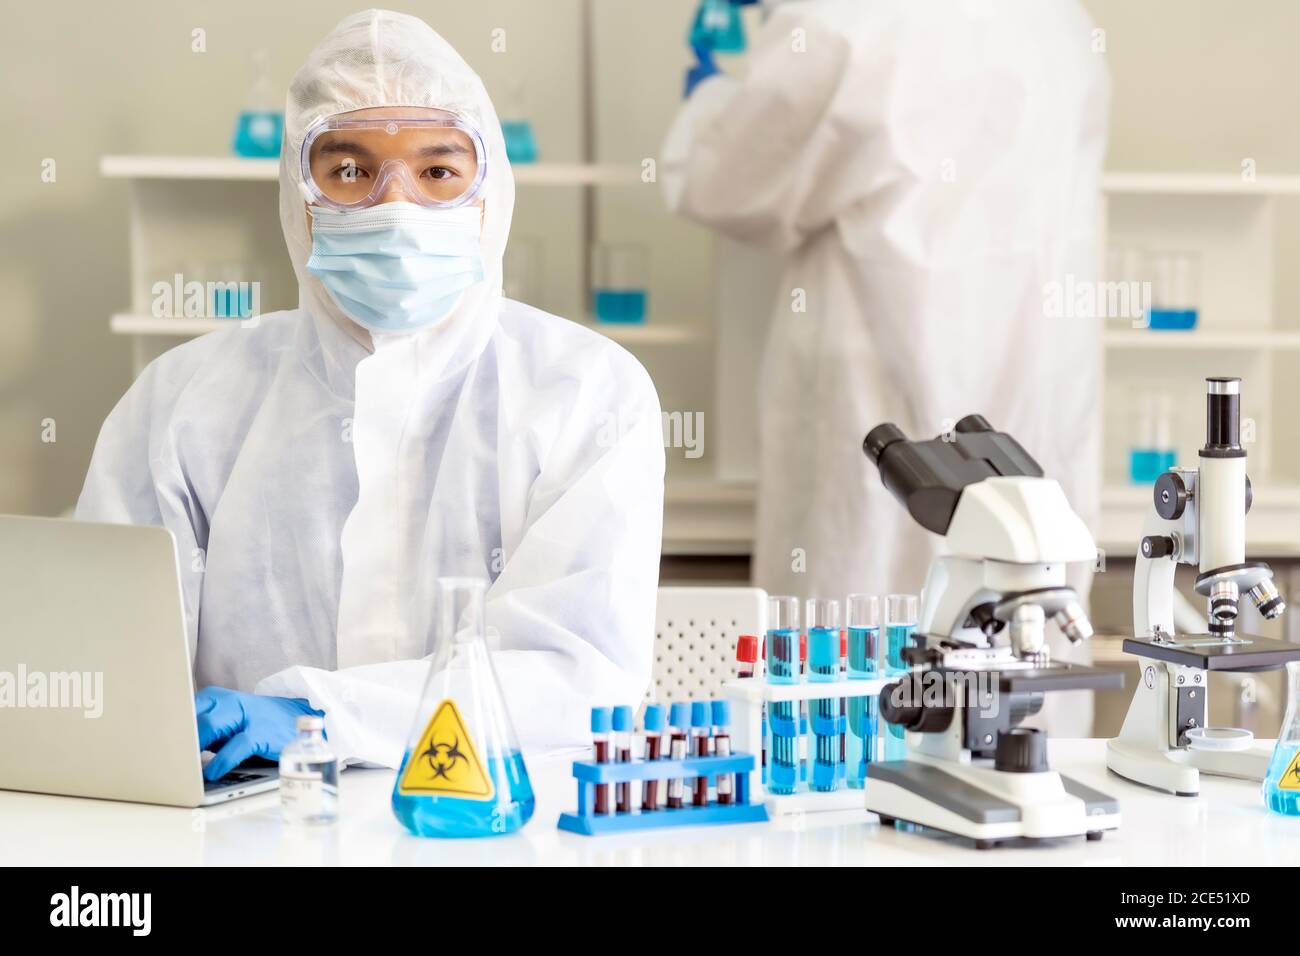 Scientists working in lab Stock Photo